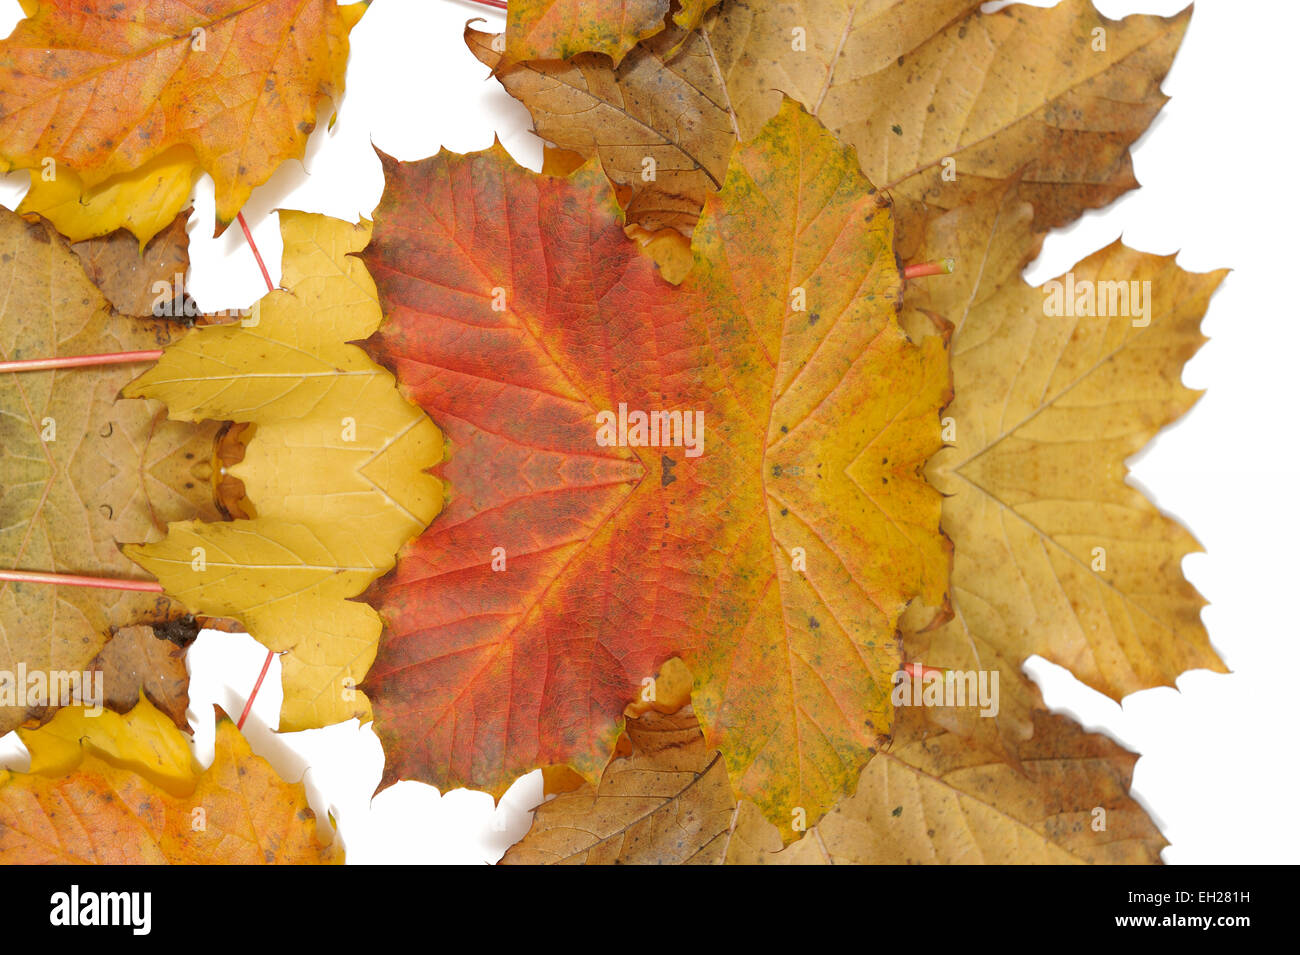 A collage of autumn leaves digitally mirrored Stock Photo